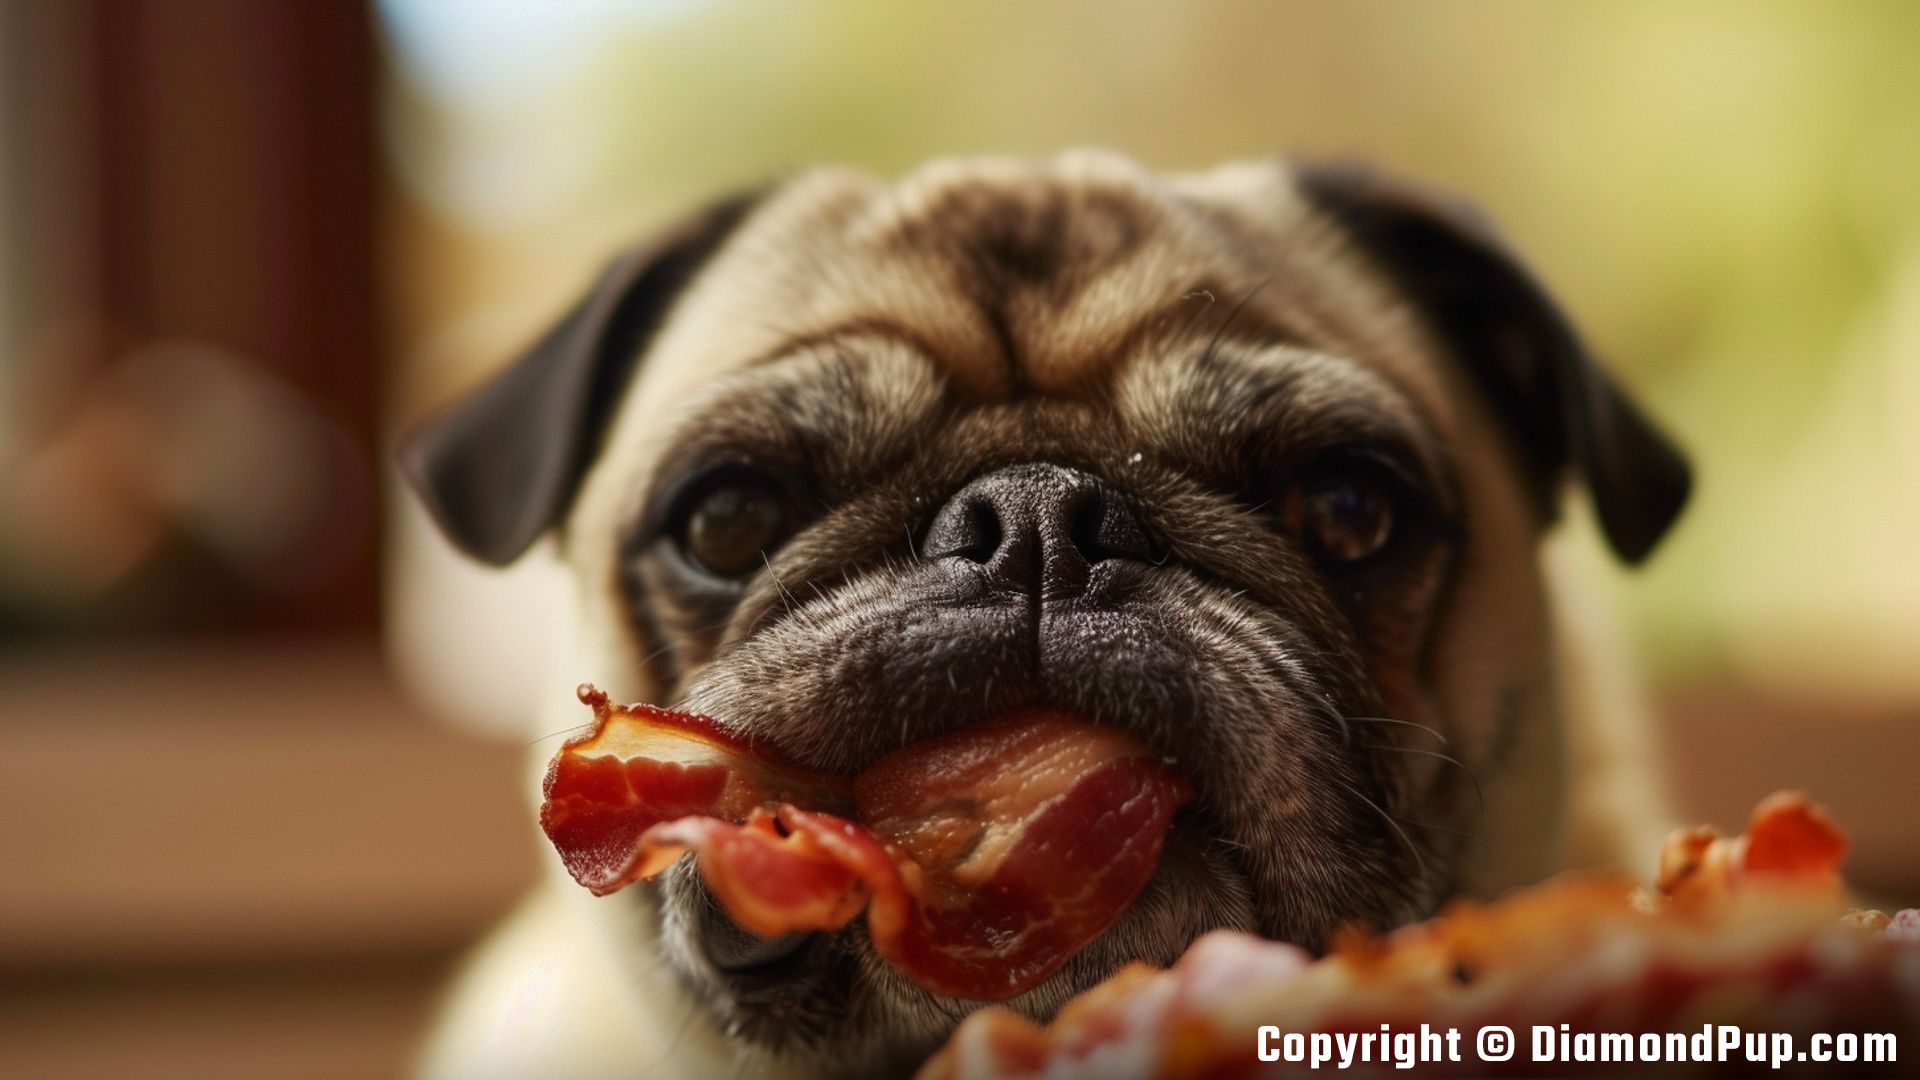 Image of a Cute Pug Snacking on Bacon